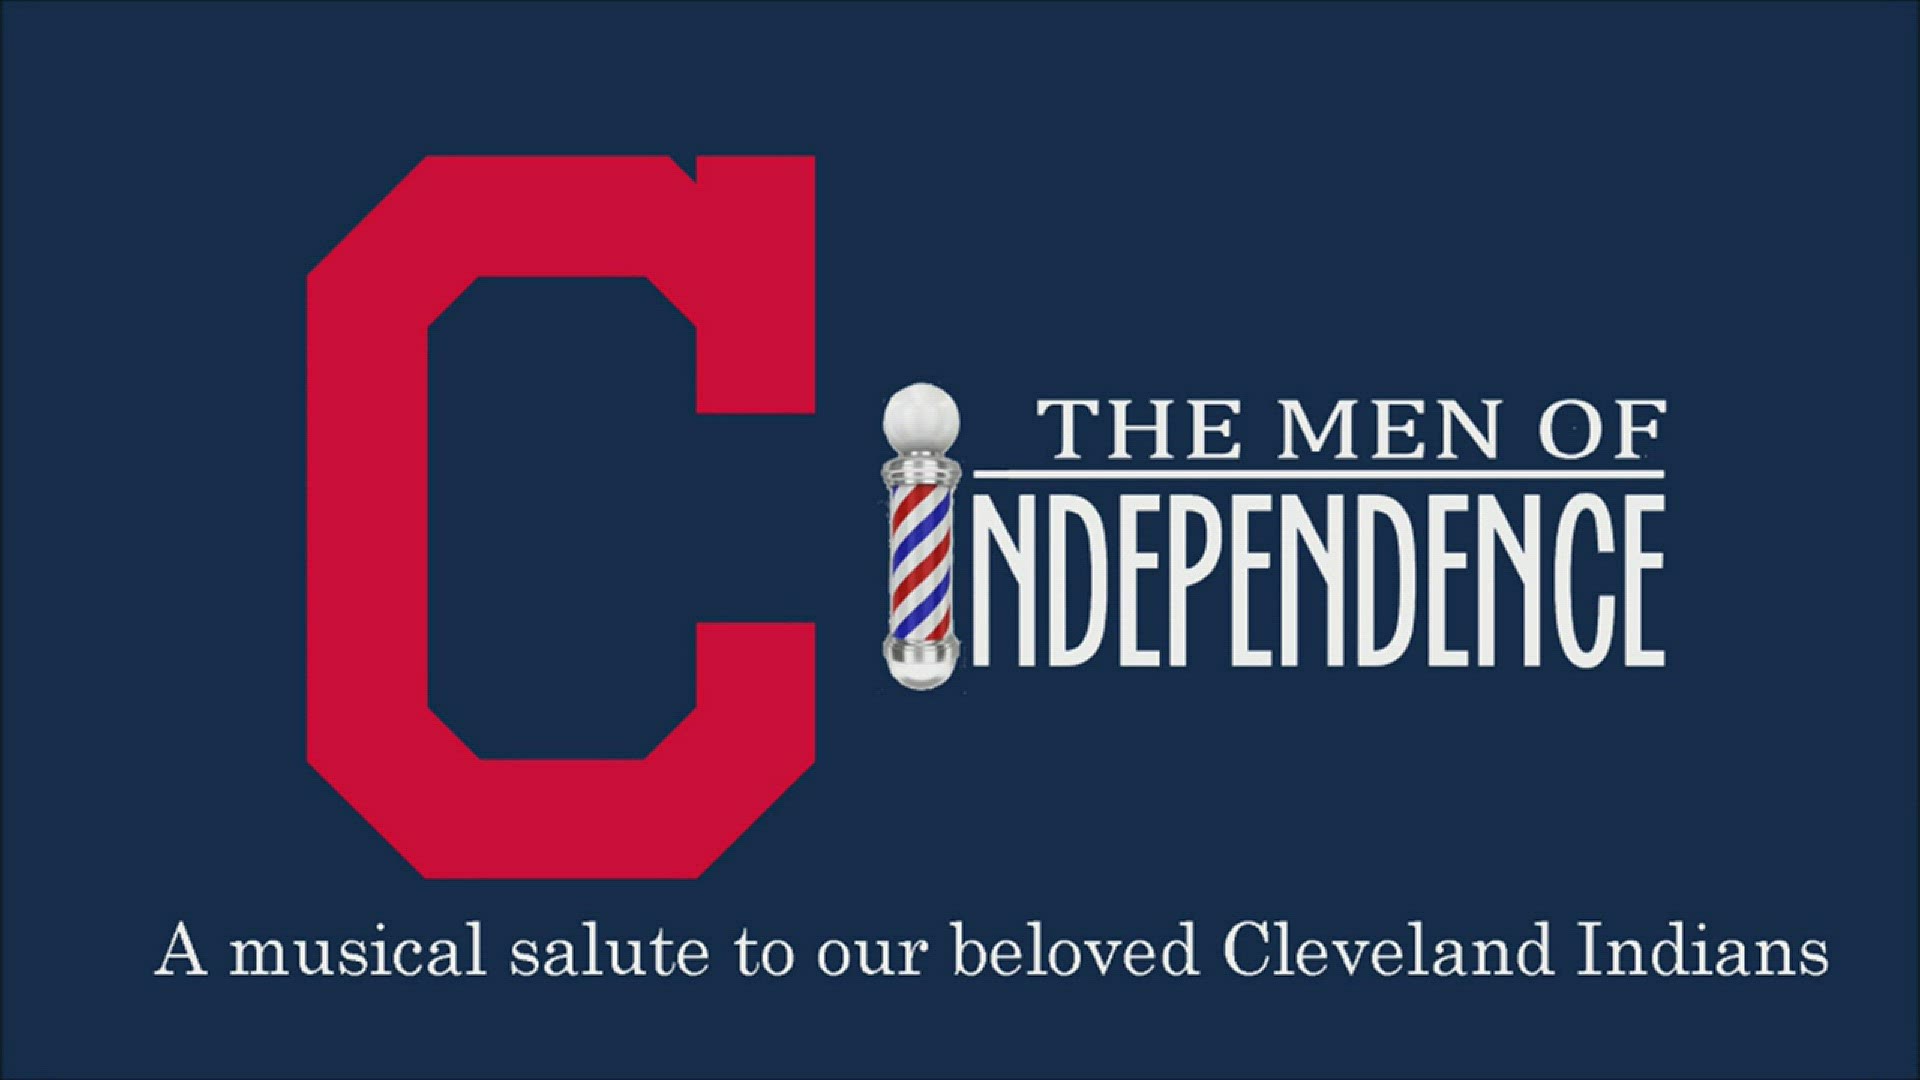 Men of Independence salute Cleveland Indians